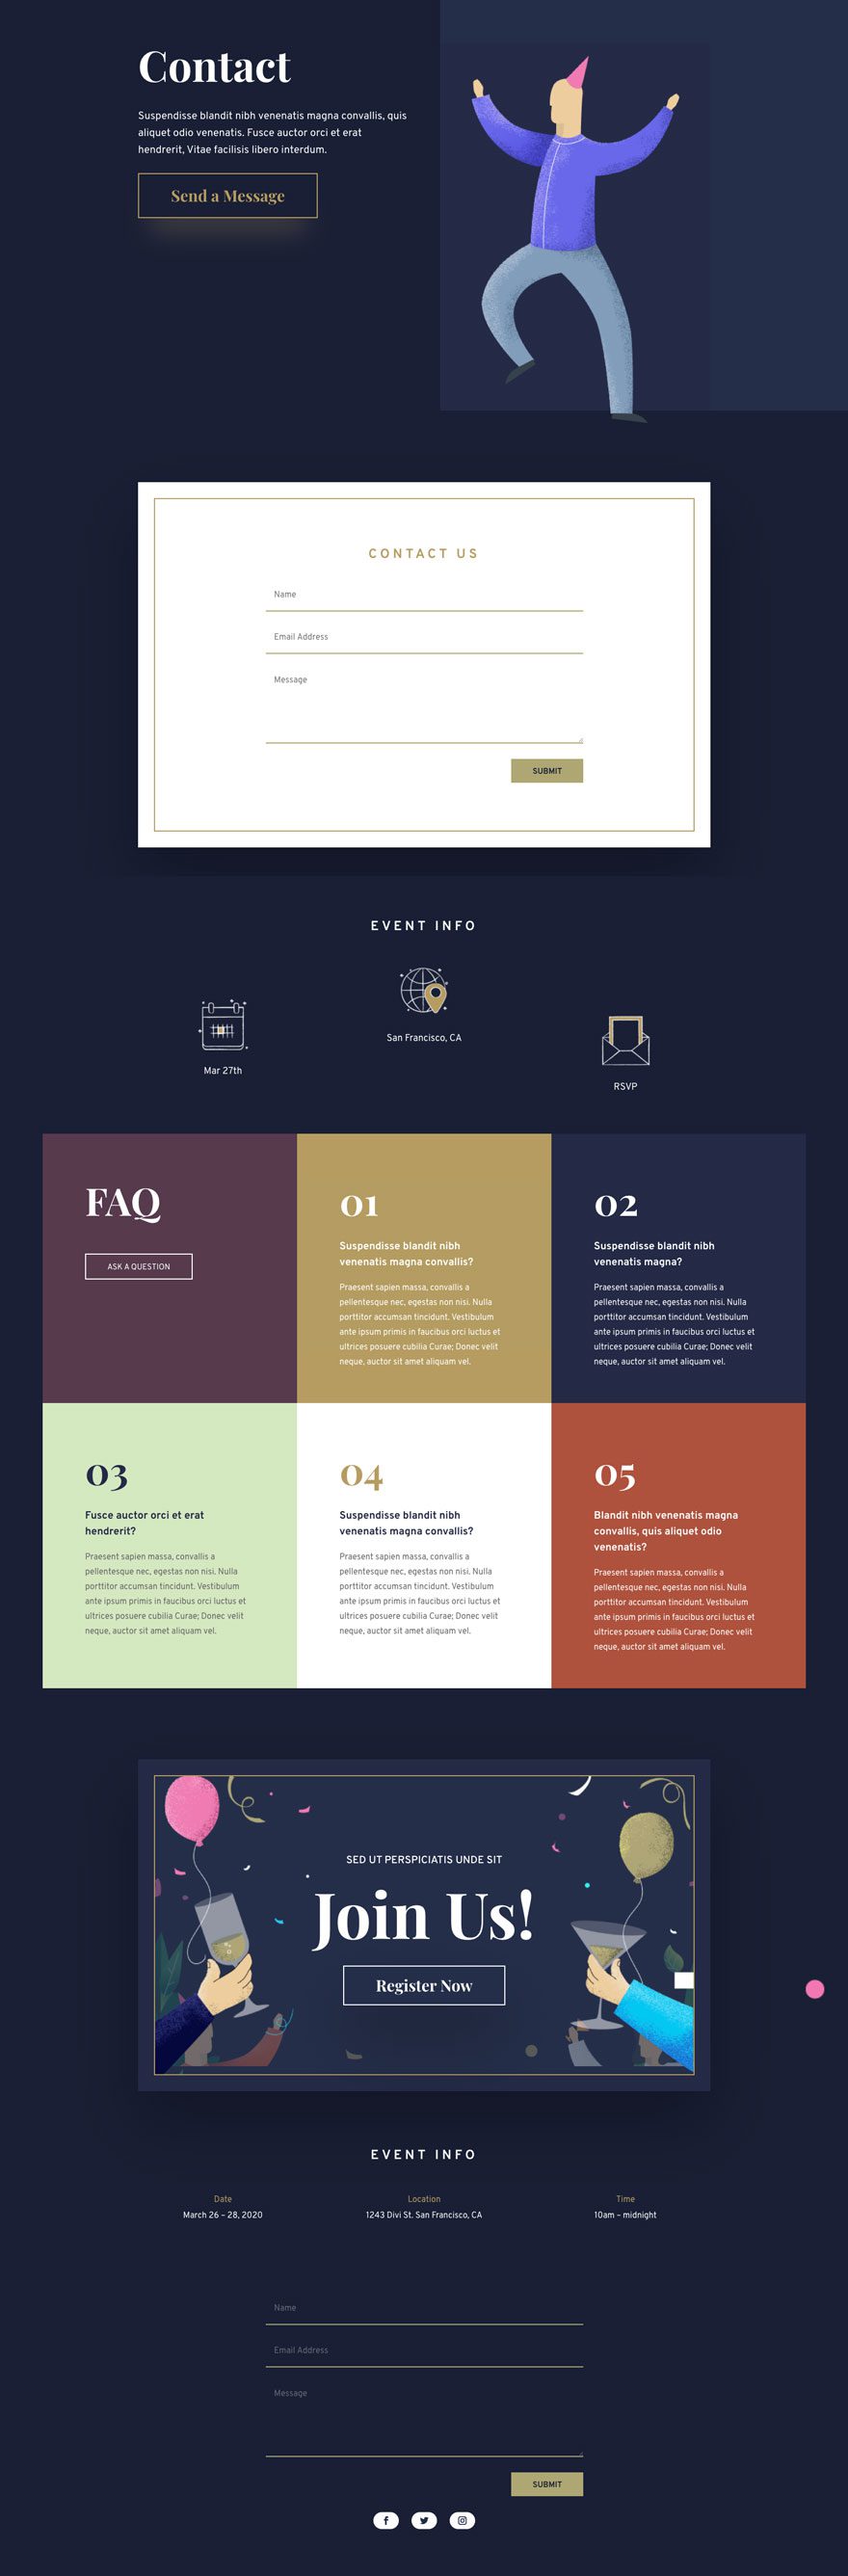 divi event layout pack